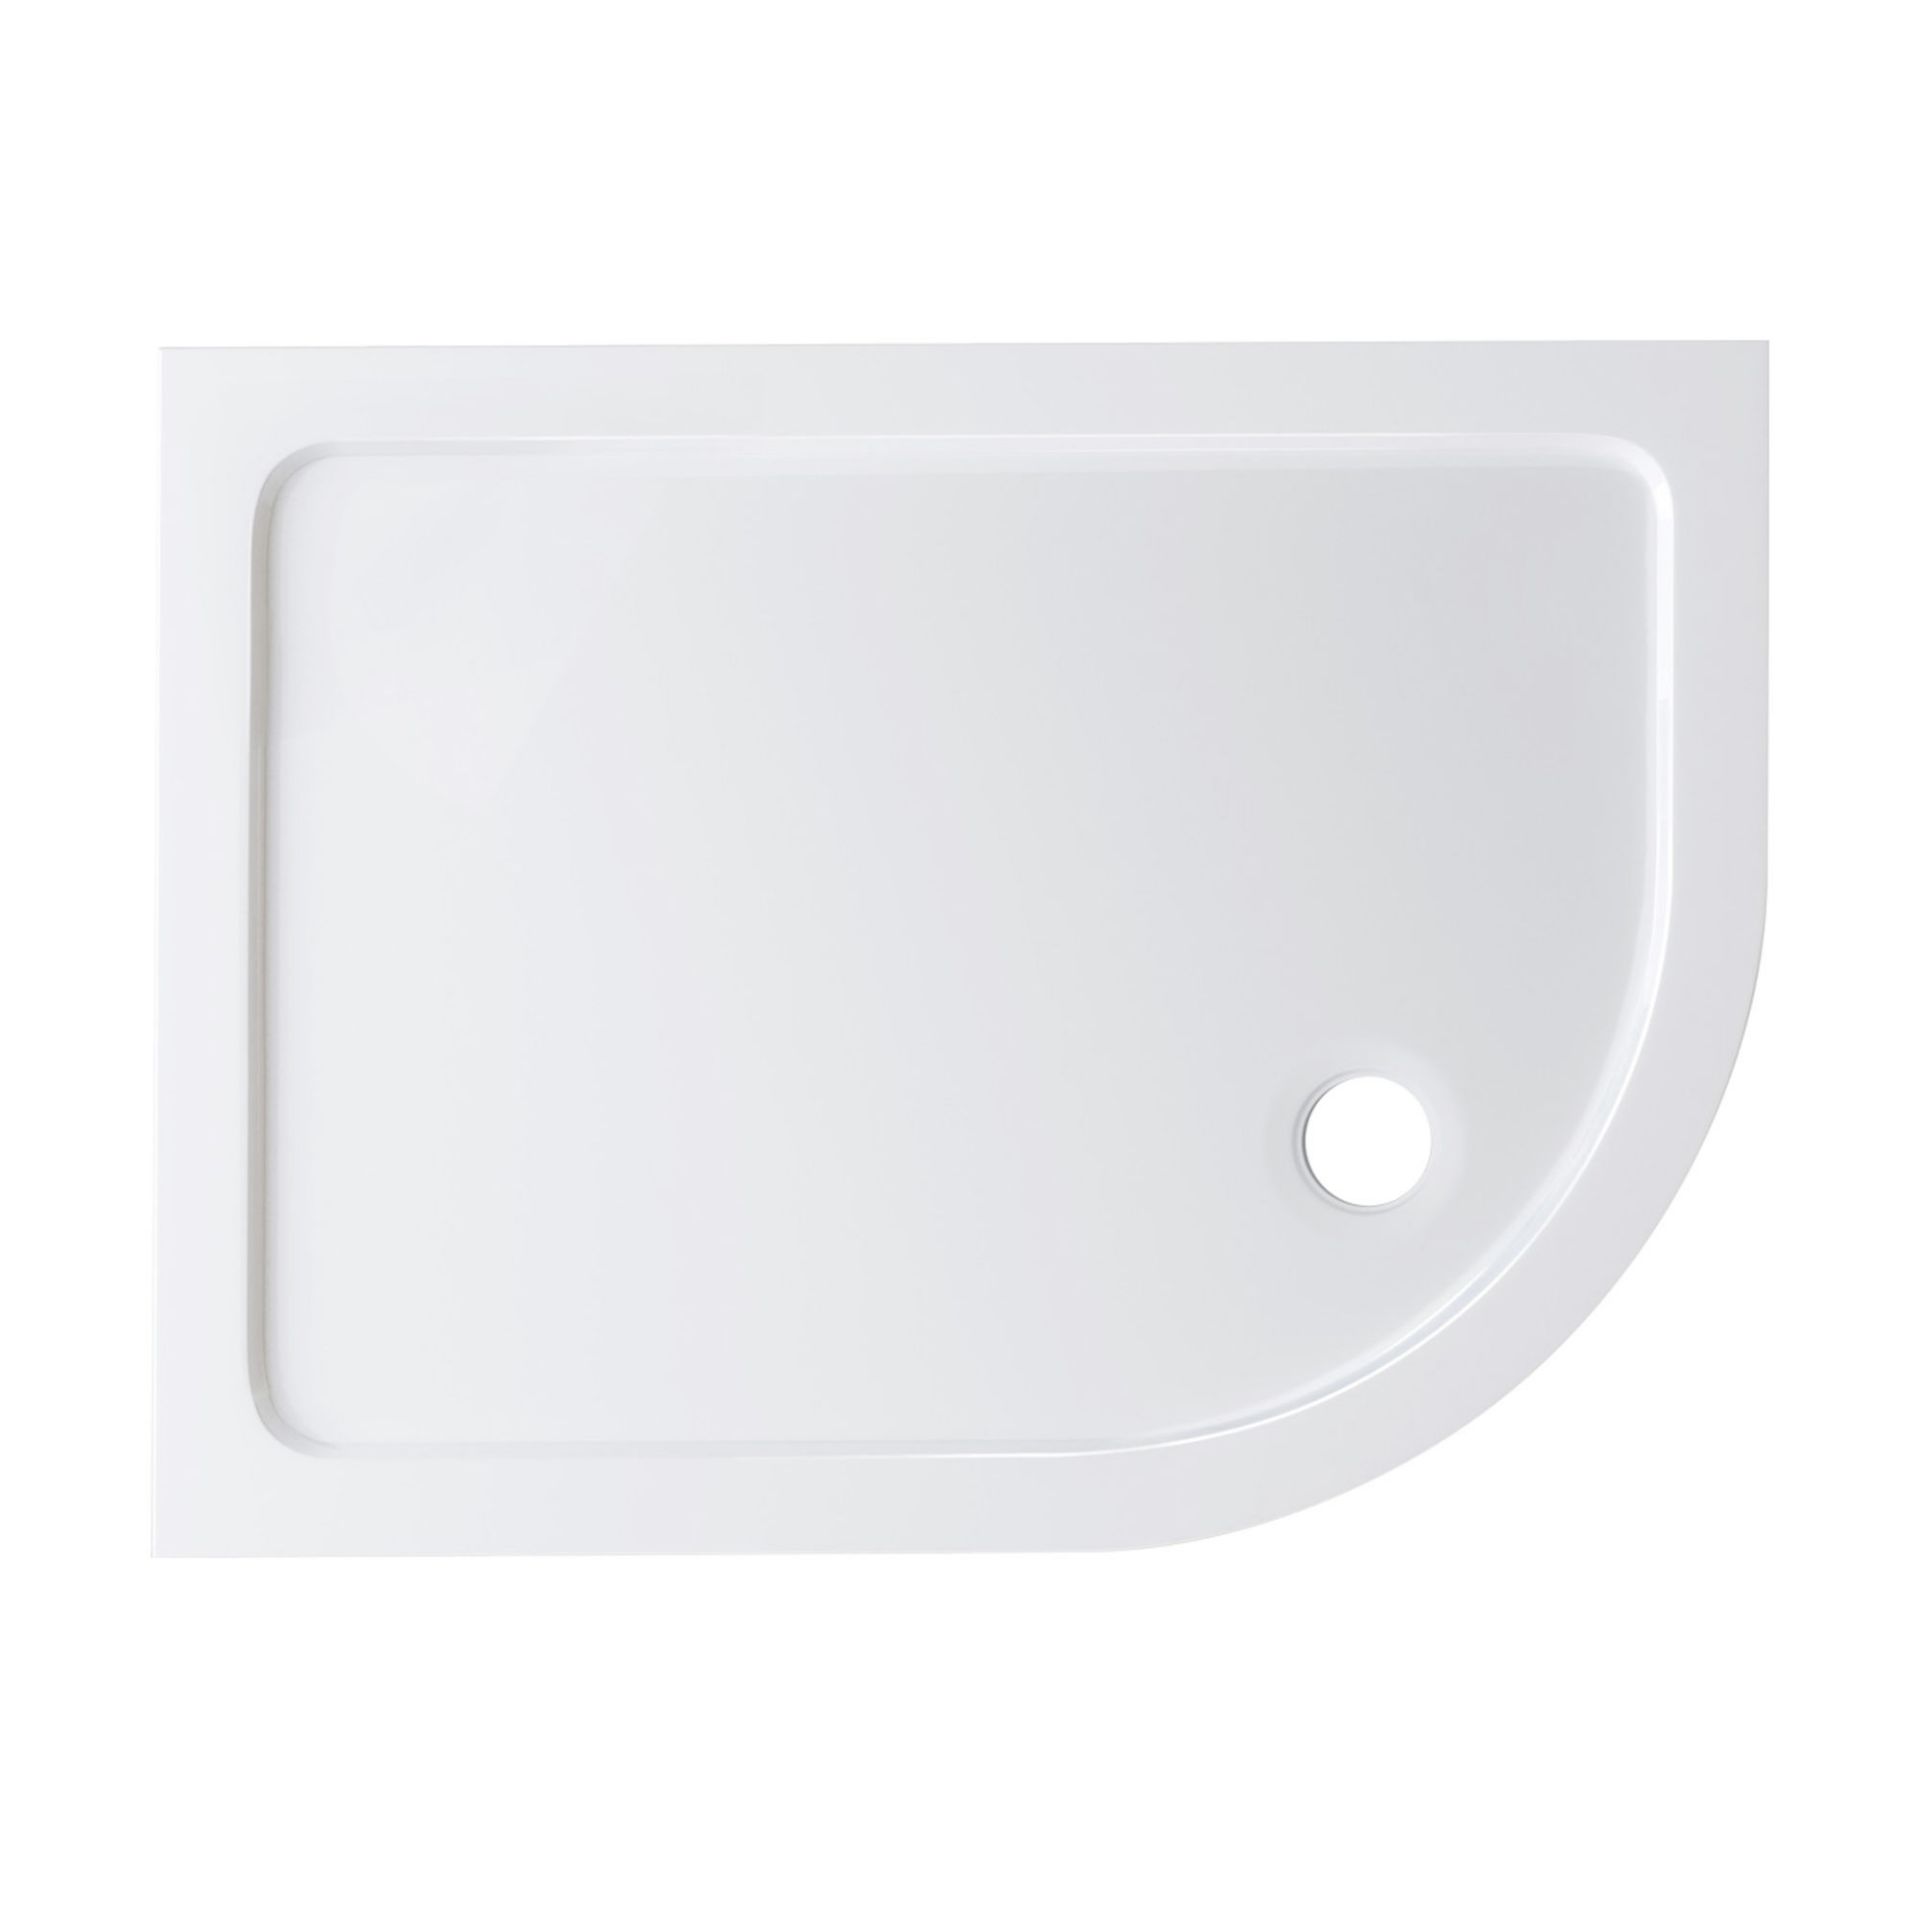 (AD54) 1200x900mm Offset Quadrant Ultra Slim Stone Shower Tray - Right. RRP £234.99. Low profile - Image 2 of 4